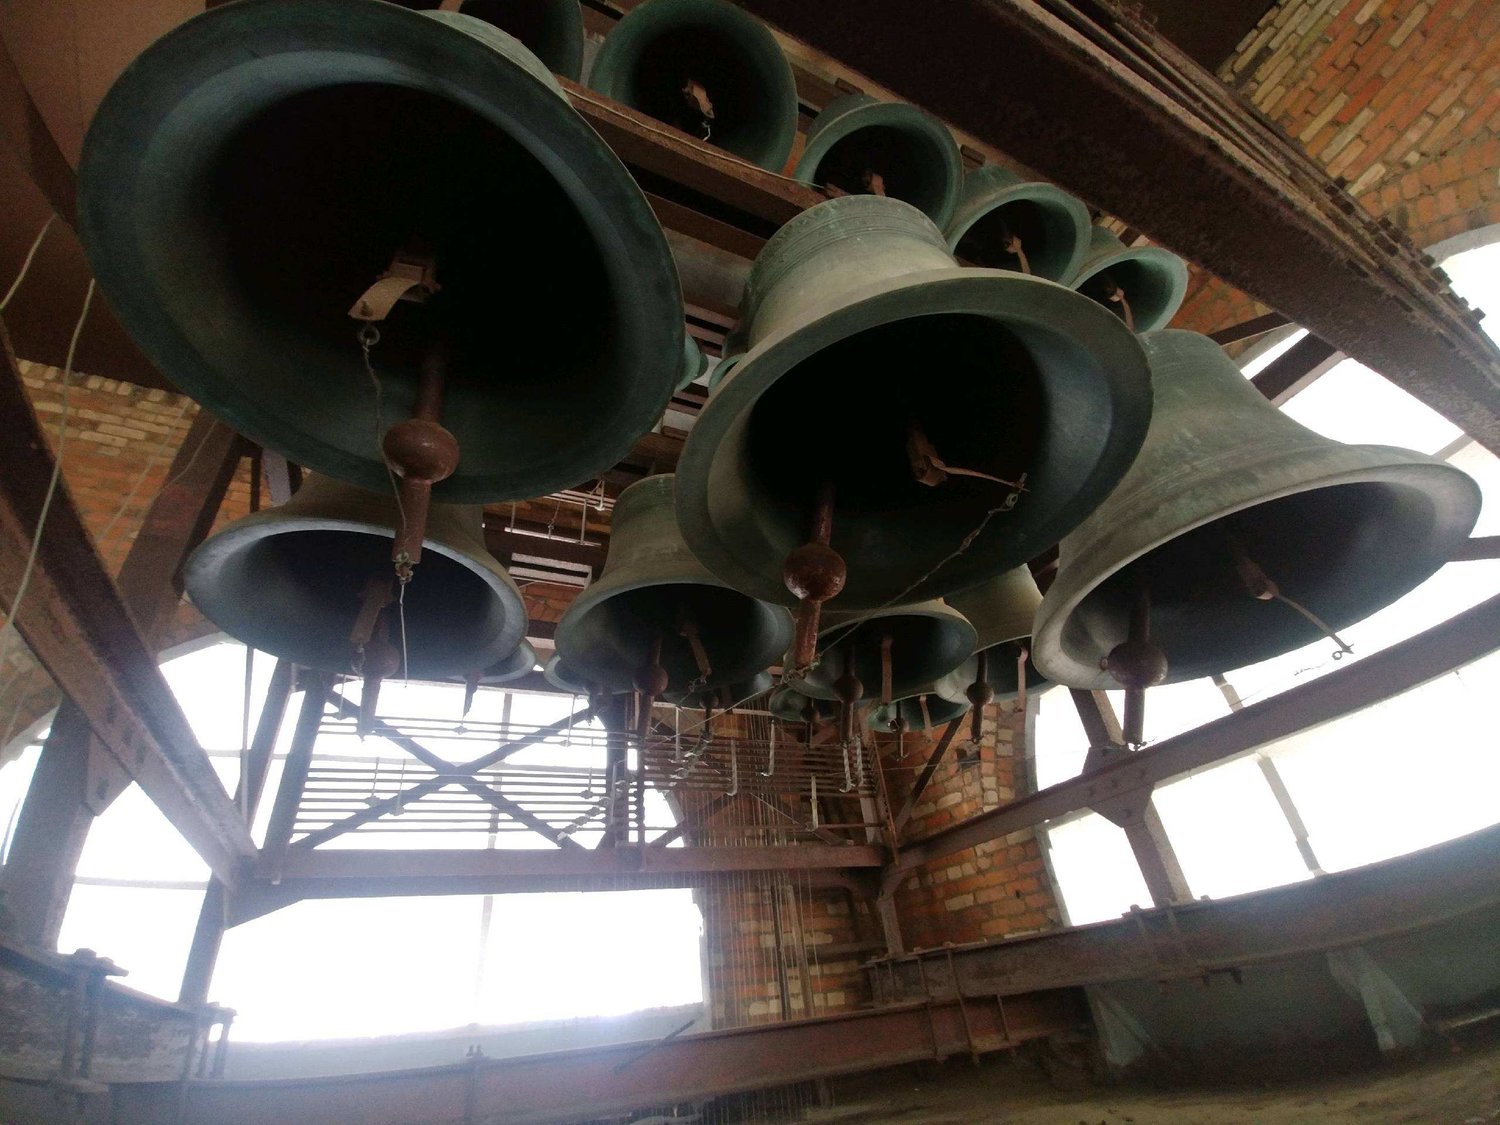 The bells in the Central United Methodist's bell tower were cast by a foundry in Holland.